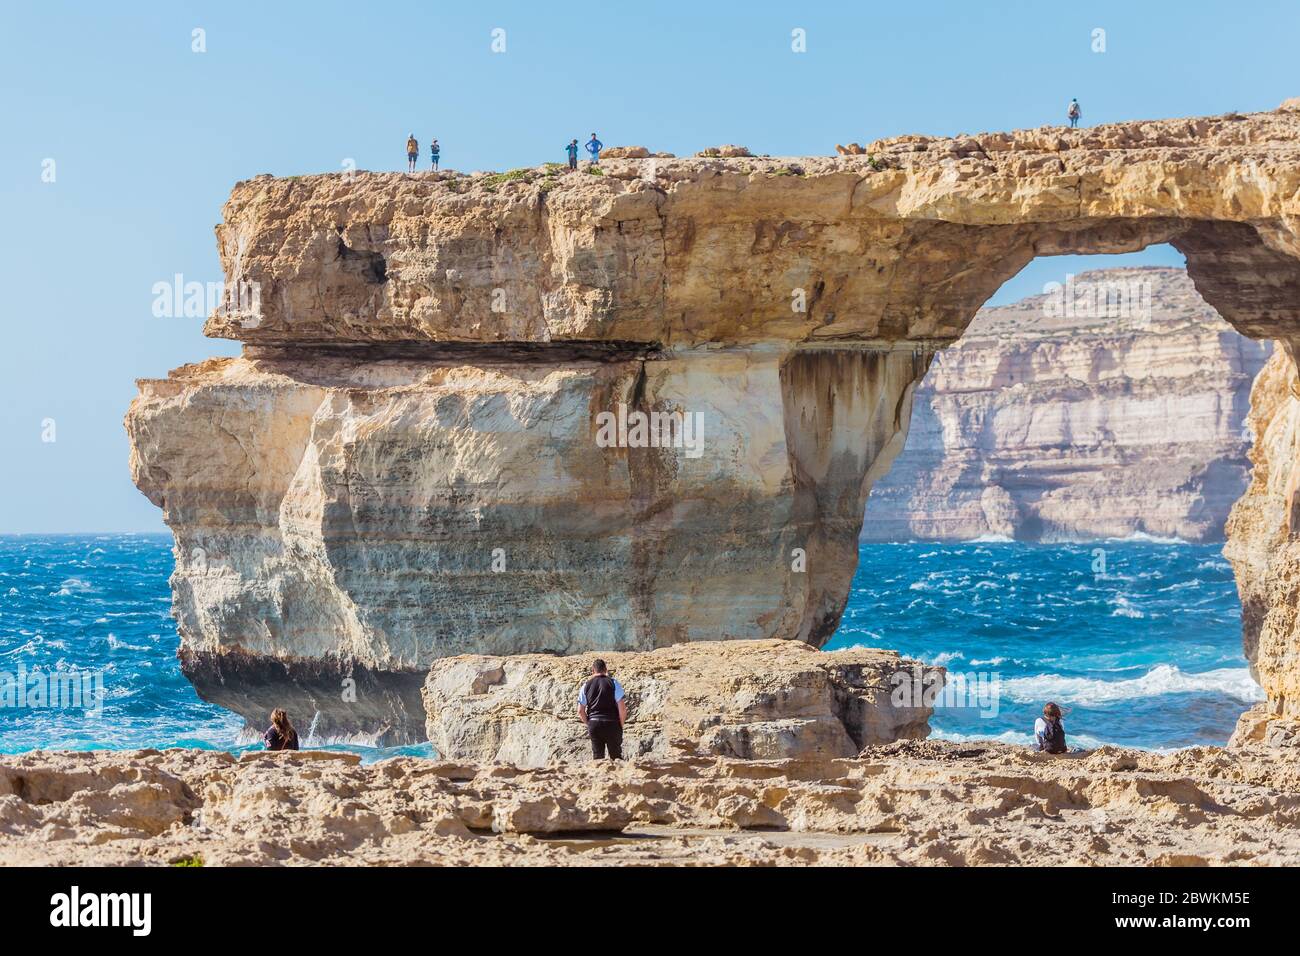 Rough seas at Azure Window in Gozo, Malta. The Azure Window, also known as the Dwejra Window, was a 28-metre-tall (92 ft) natural arch on the island o Stock Photo